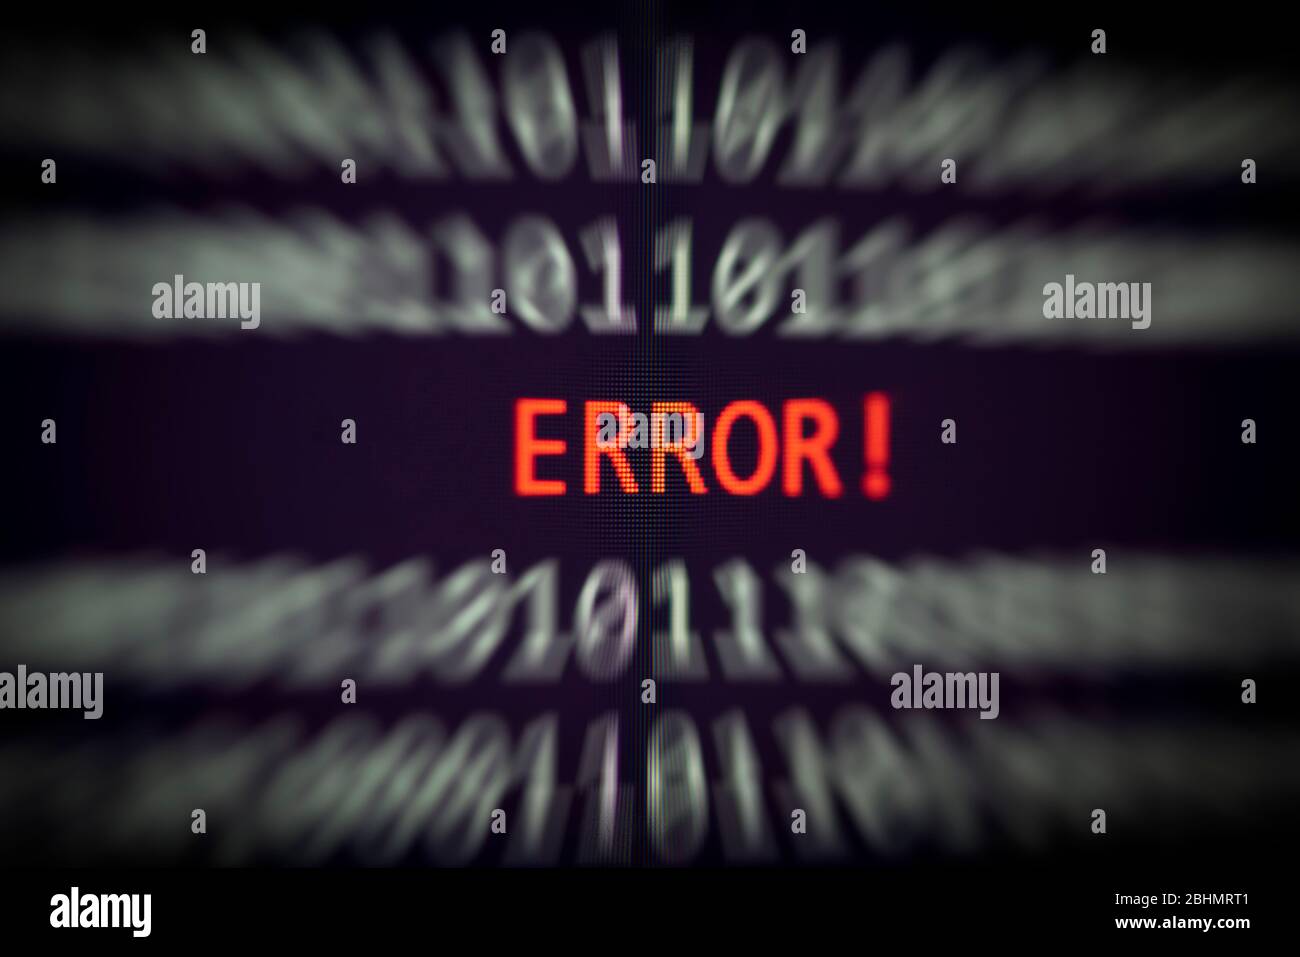 Error Message On Display Screen Technology Binary Code Number Data Alert Computer Network System Problem Error Software Concept Selective Focus Stock Photo Alamy